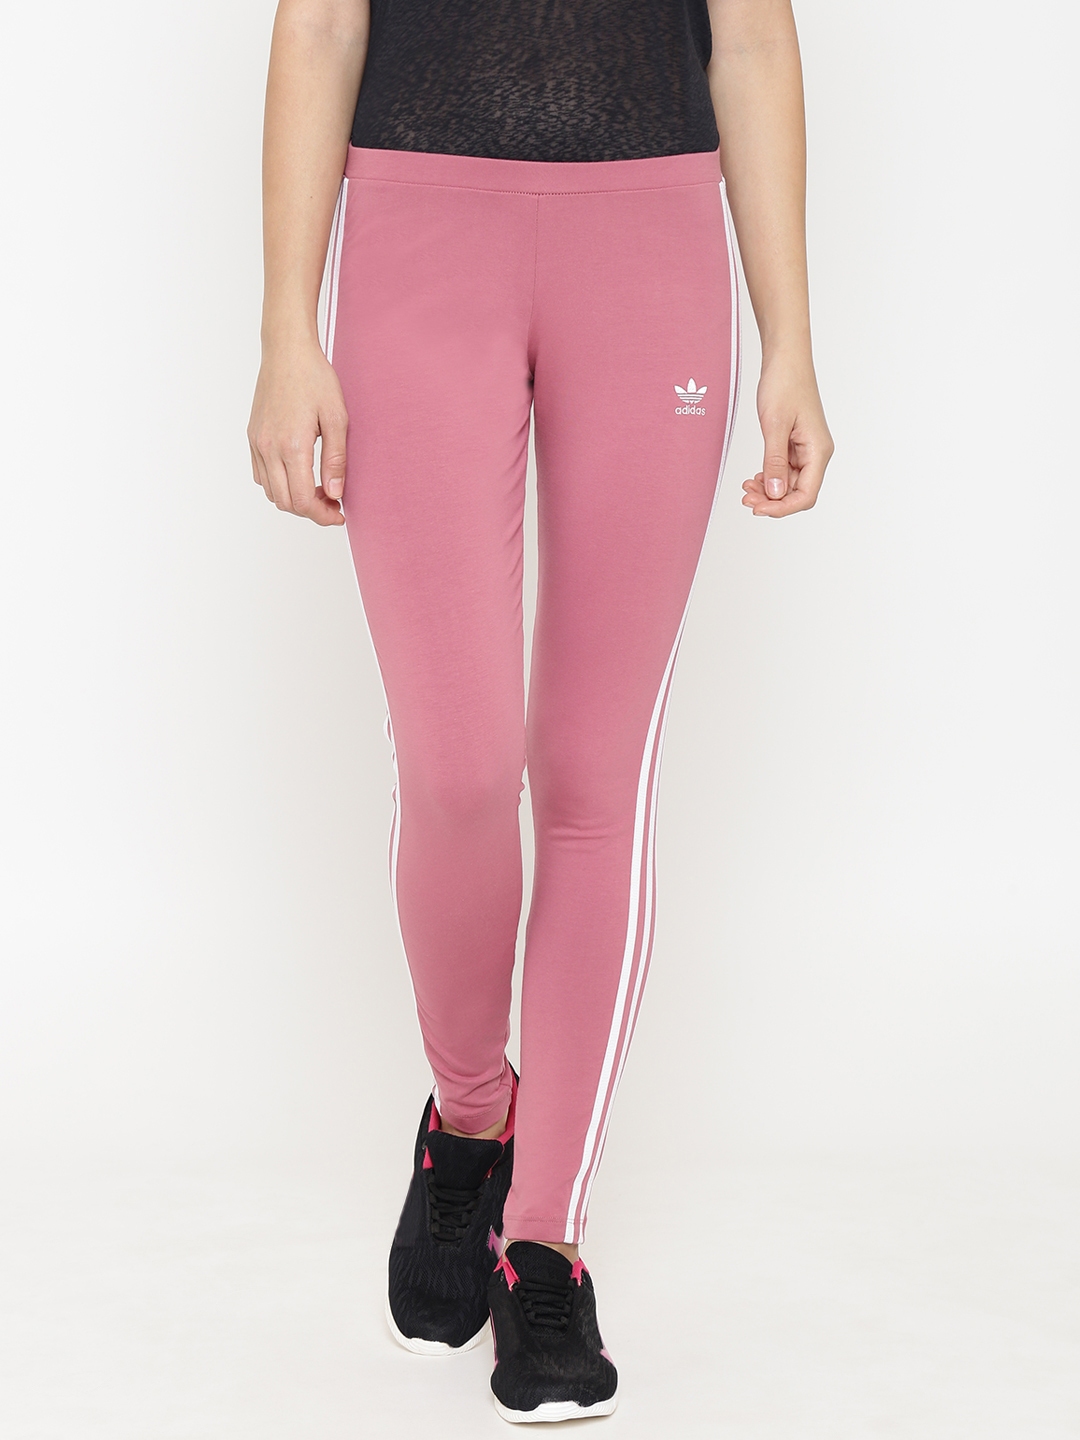 Buy ADIDAS Originals Women Pink Solid 3 Stripes Tights - Tights for Women 7401359 Myntra